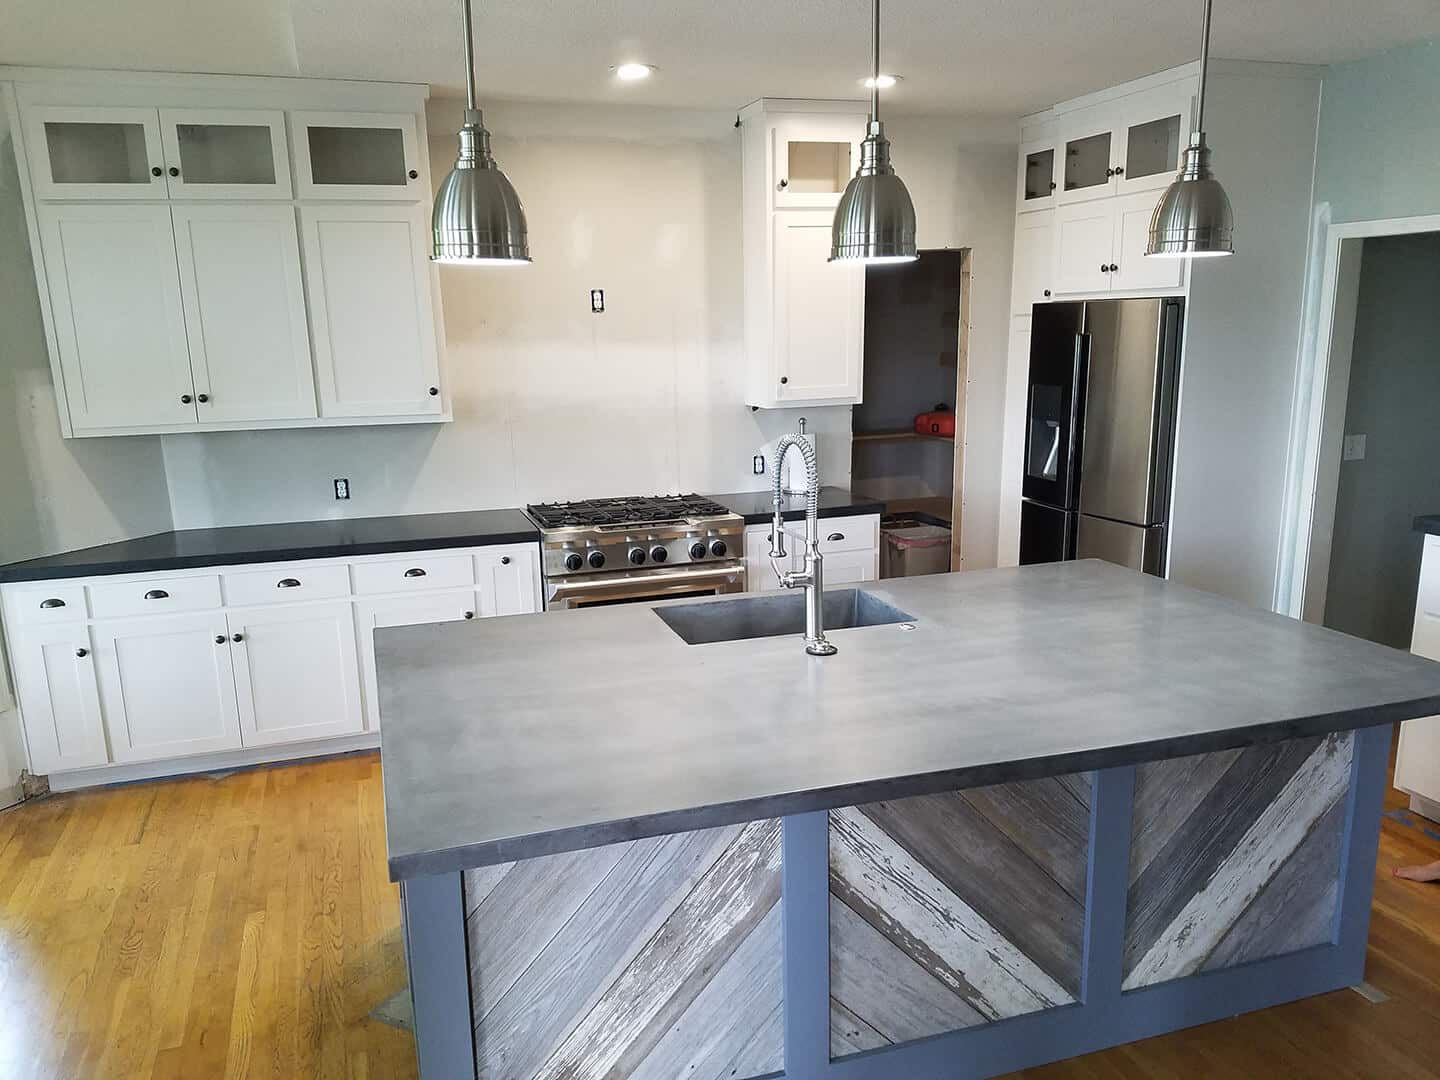 Farmhouse kitchen with large overcast color top on kitchen island